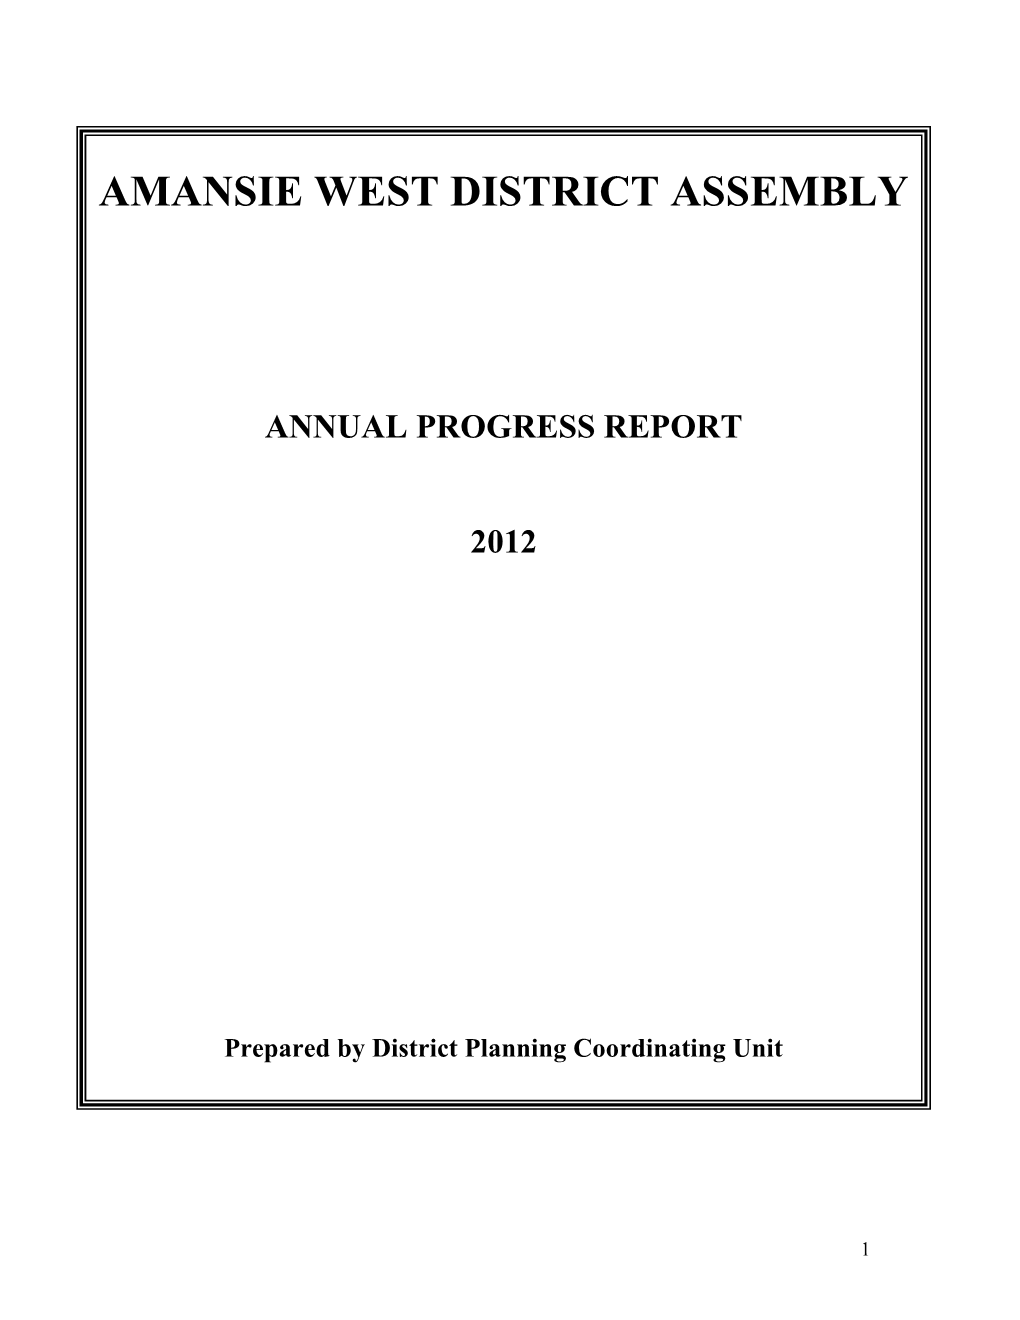 Amansie West District Assembly